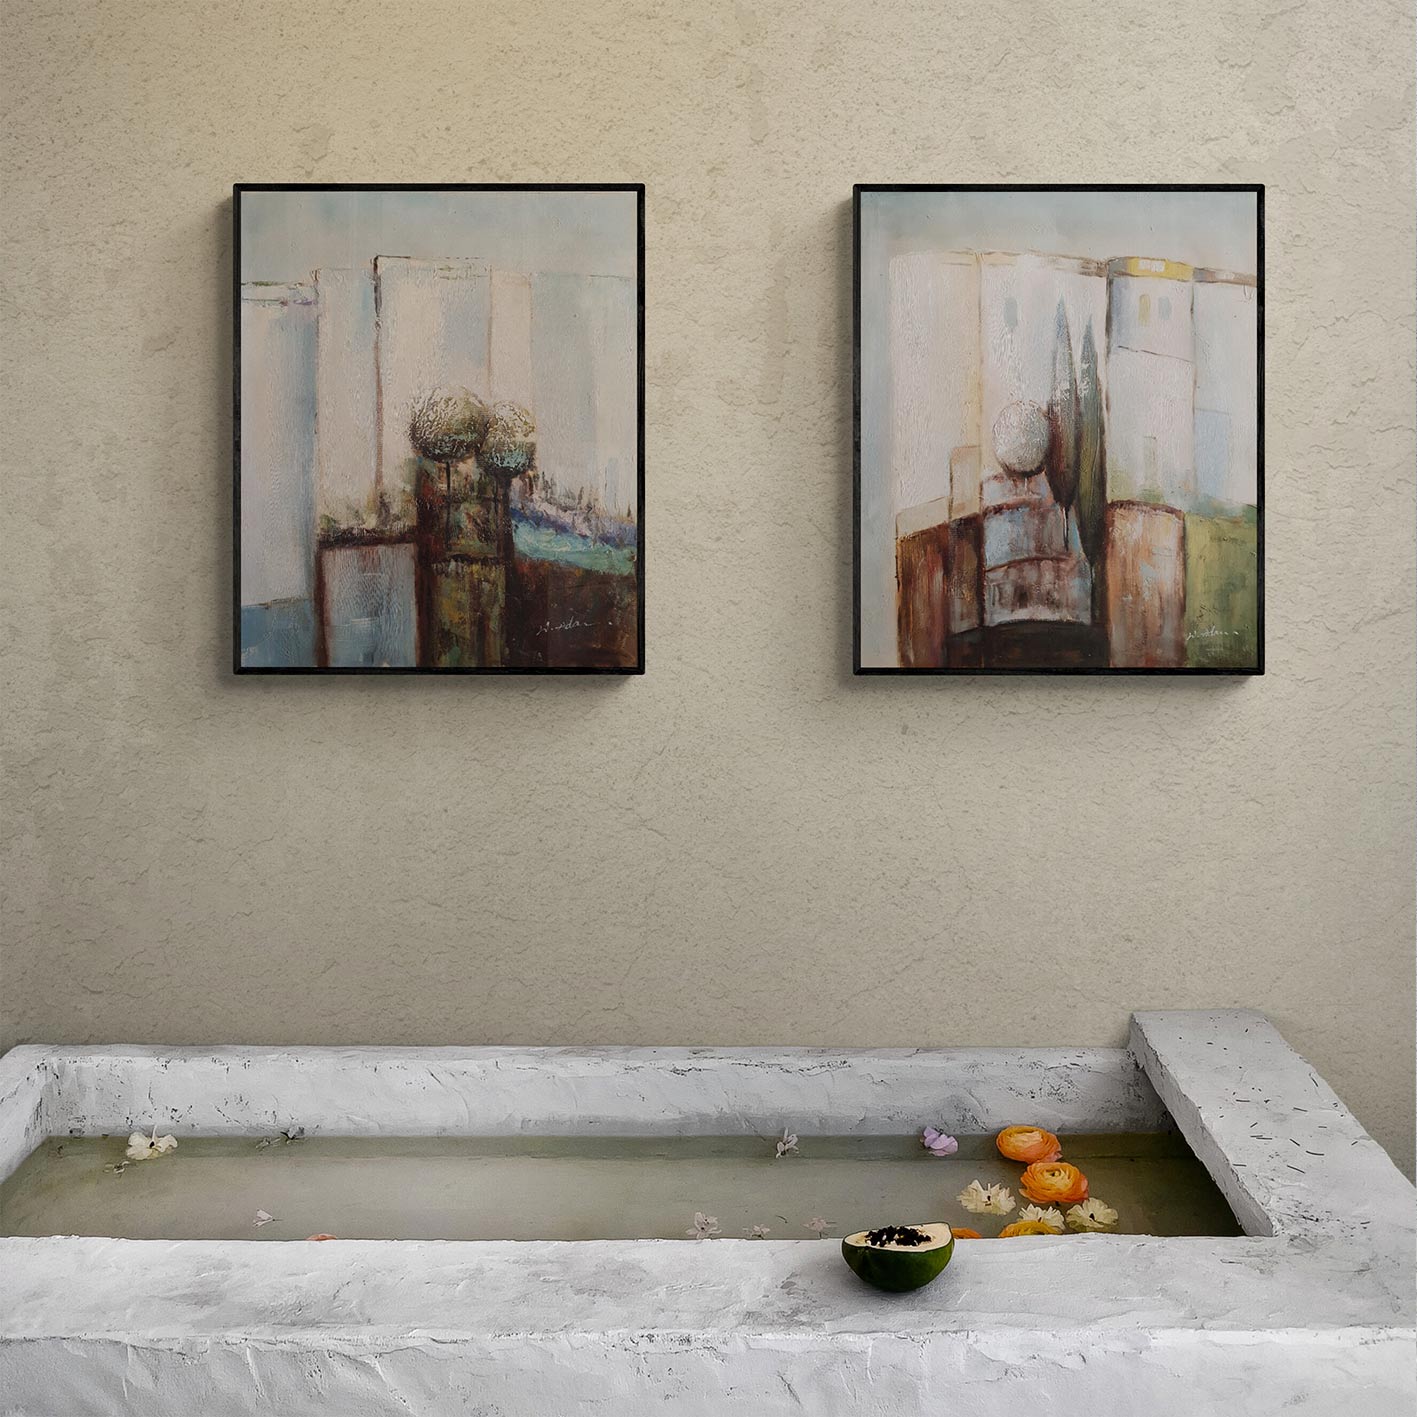 Urban Abstract Diptych Painting 50x60 cm [2 pieces]